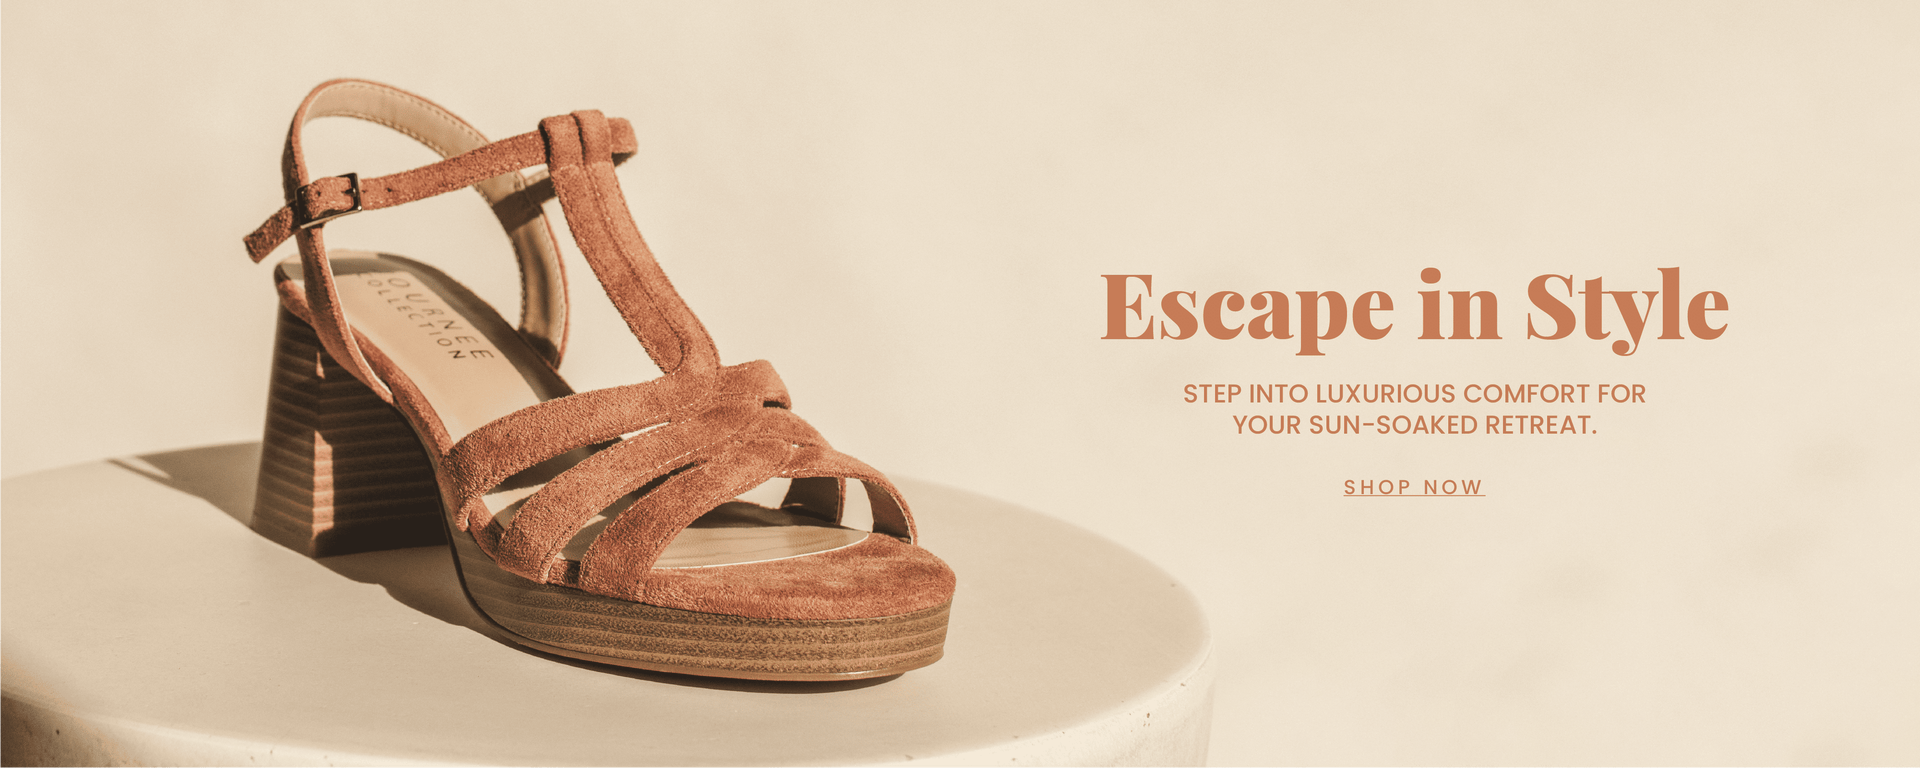 "Escape in Style" text header in a cognac font with a "step into luxurious comfort for your sun soaked retreat. " sub header. A faux suede strappy sandal with a stacked block heel is in focus. "Shop now" call to action.